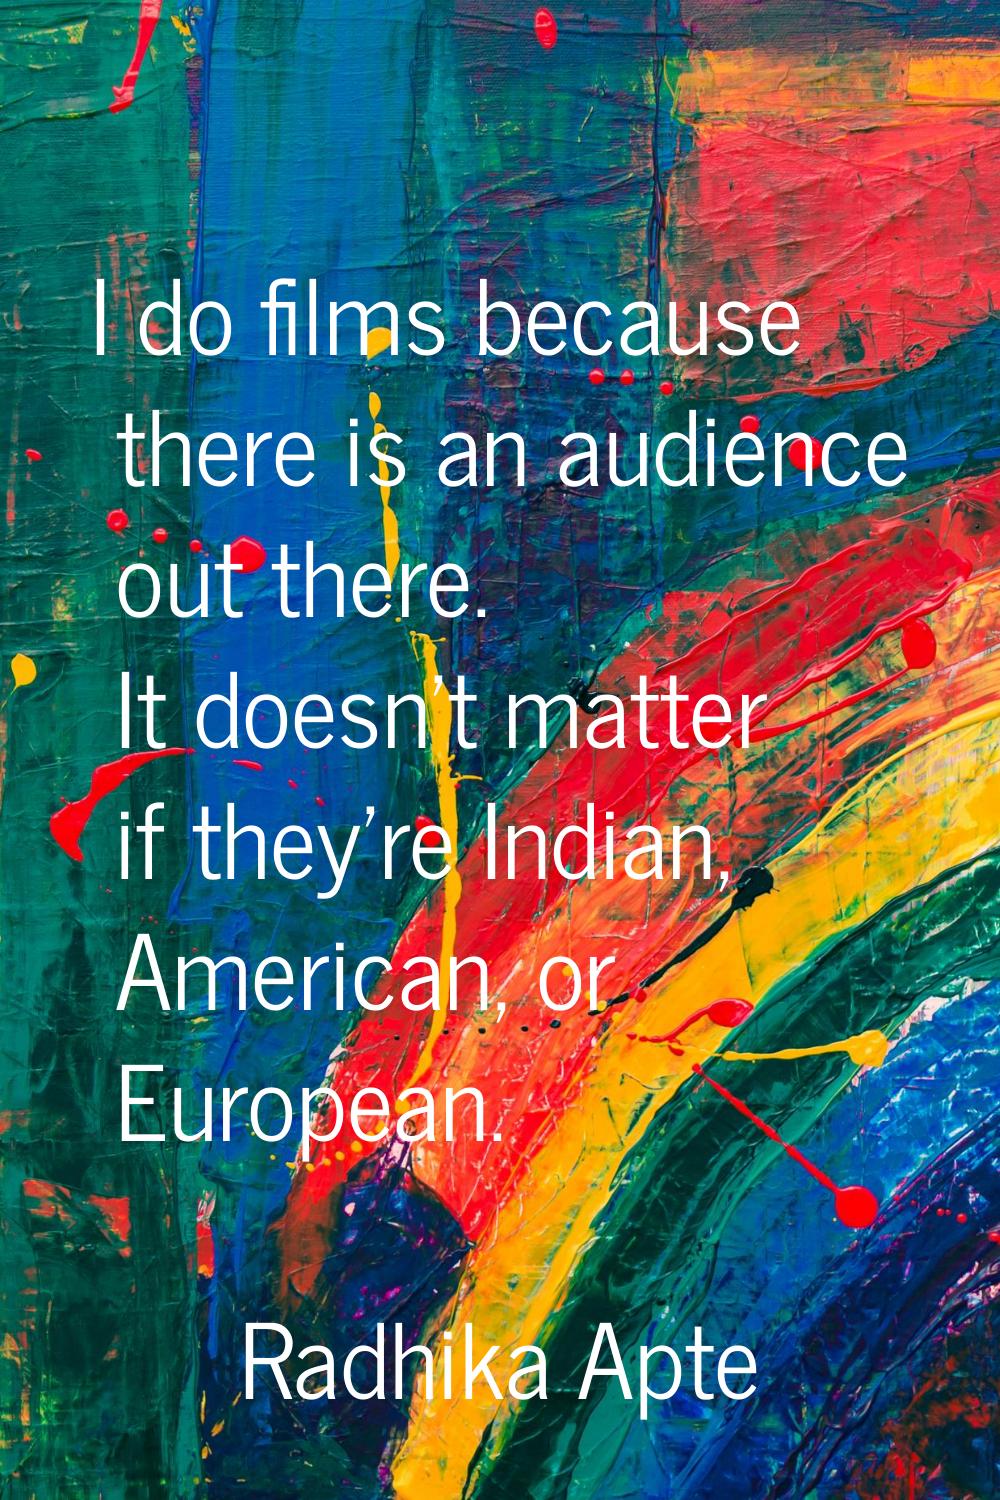 I do films because there is an audience out there. It doesn't matter if they're Indian, American, o